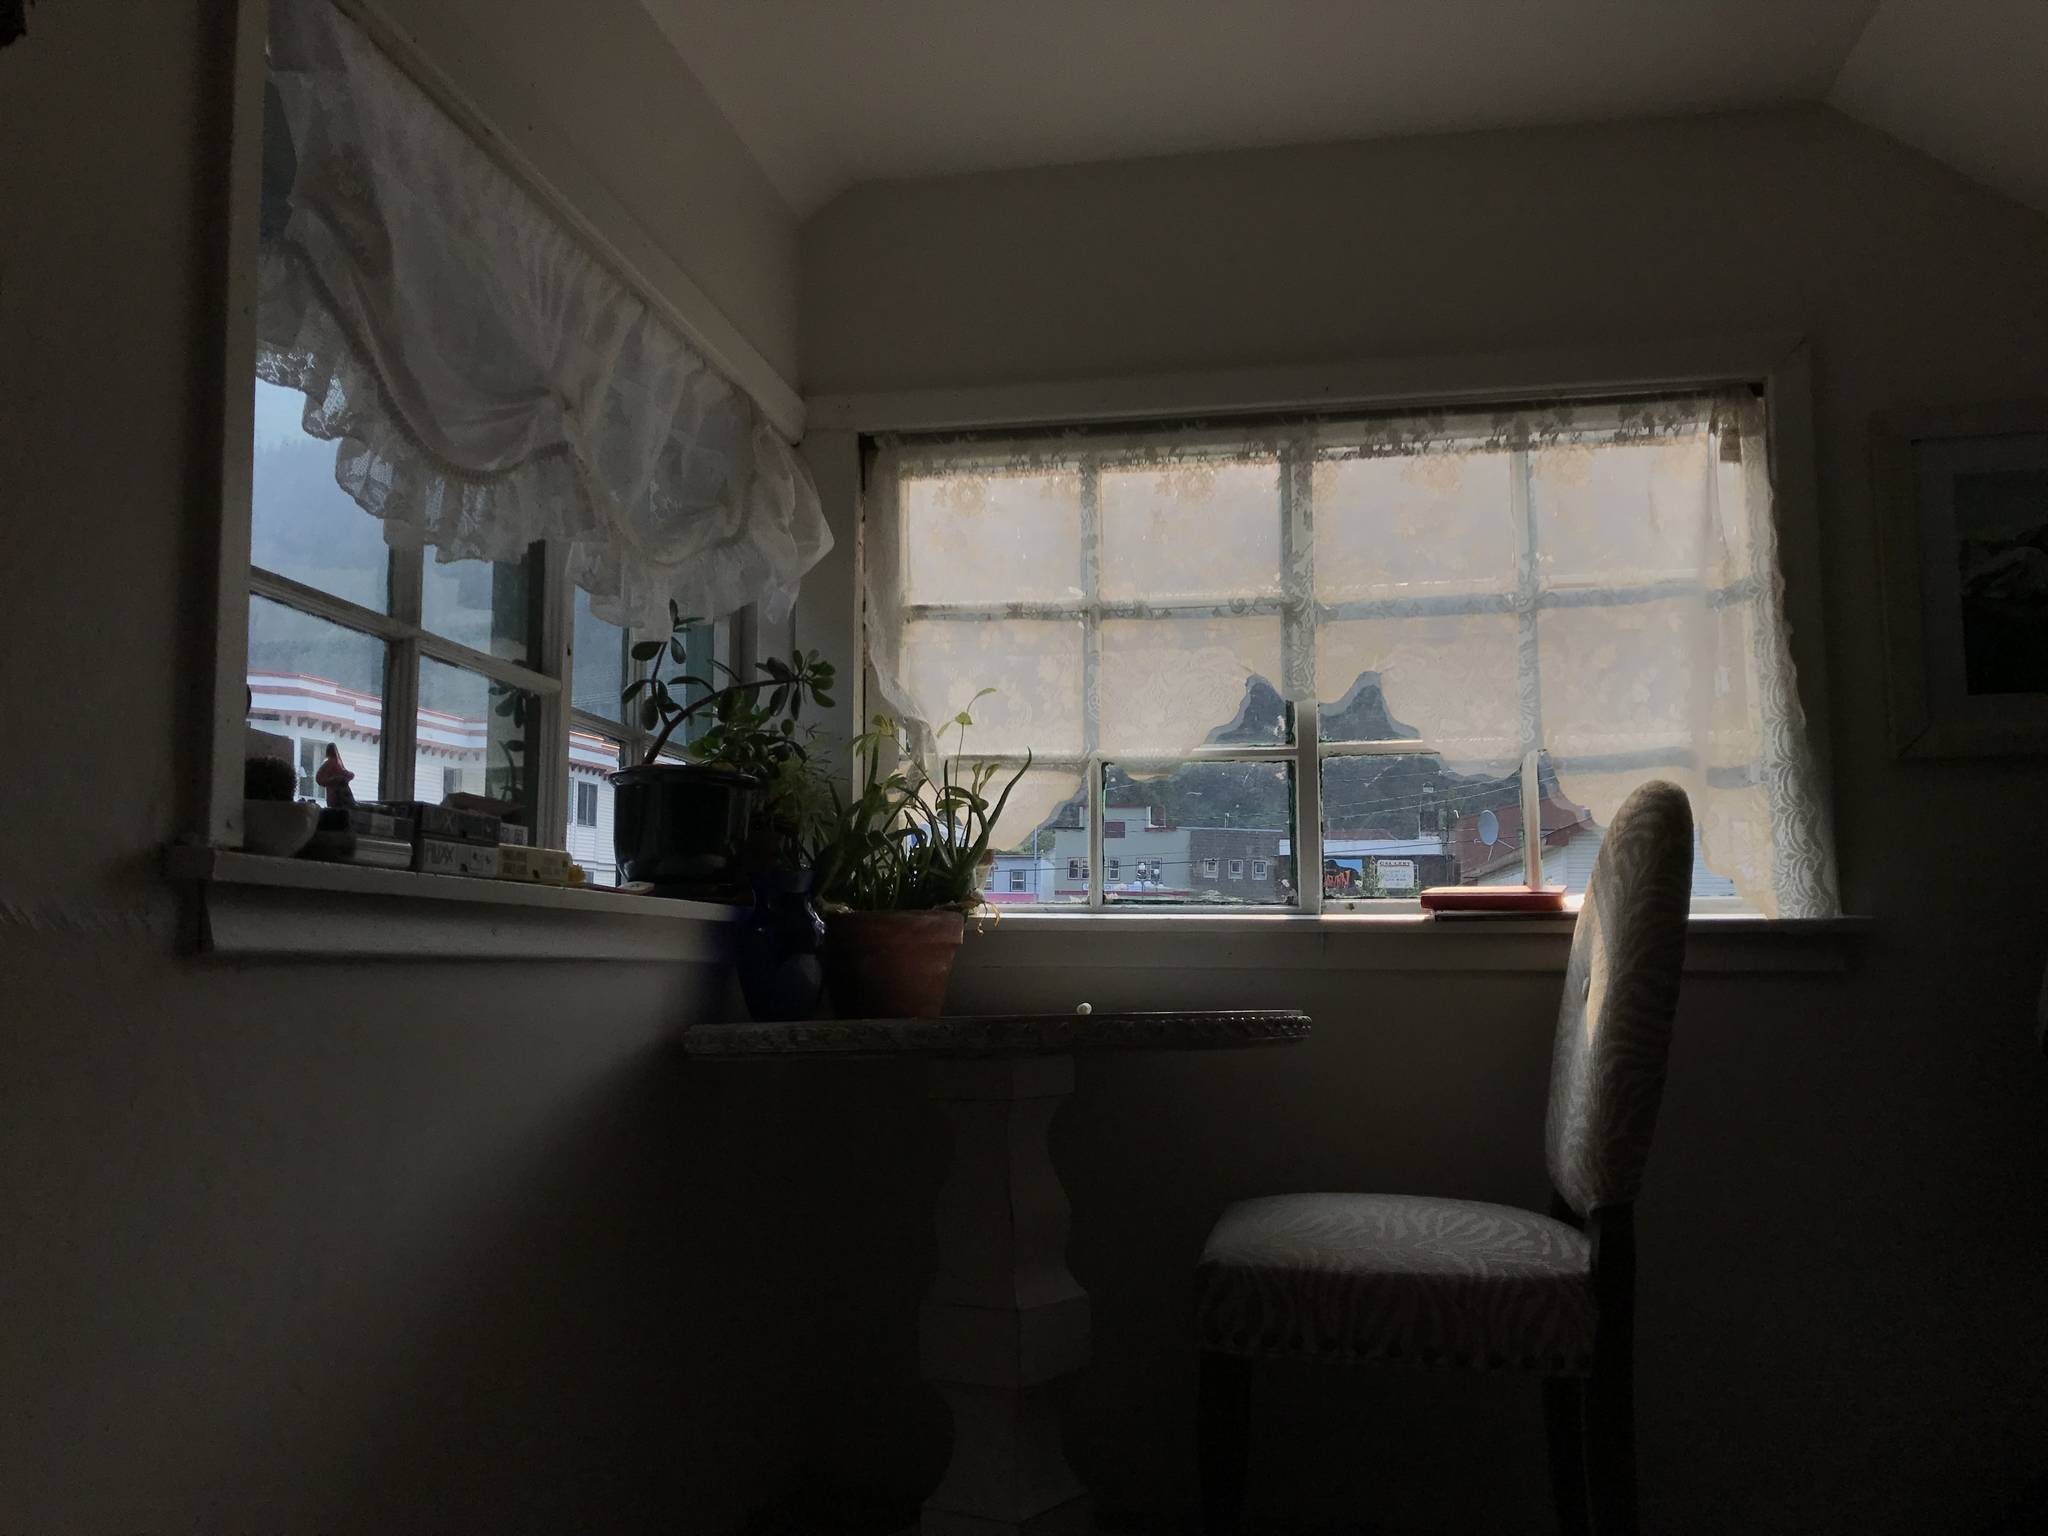 The old windows in Kat Sorensen’s apartment are painted shut from the inside and the outside which can cause some issues on hot, Alaska afternoons. (Photo by Kat Sorensen/Peninsula Clarion)